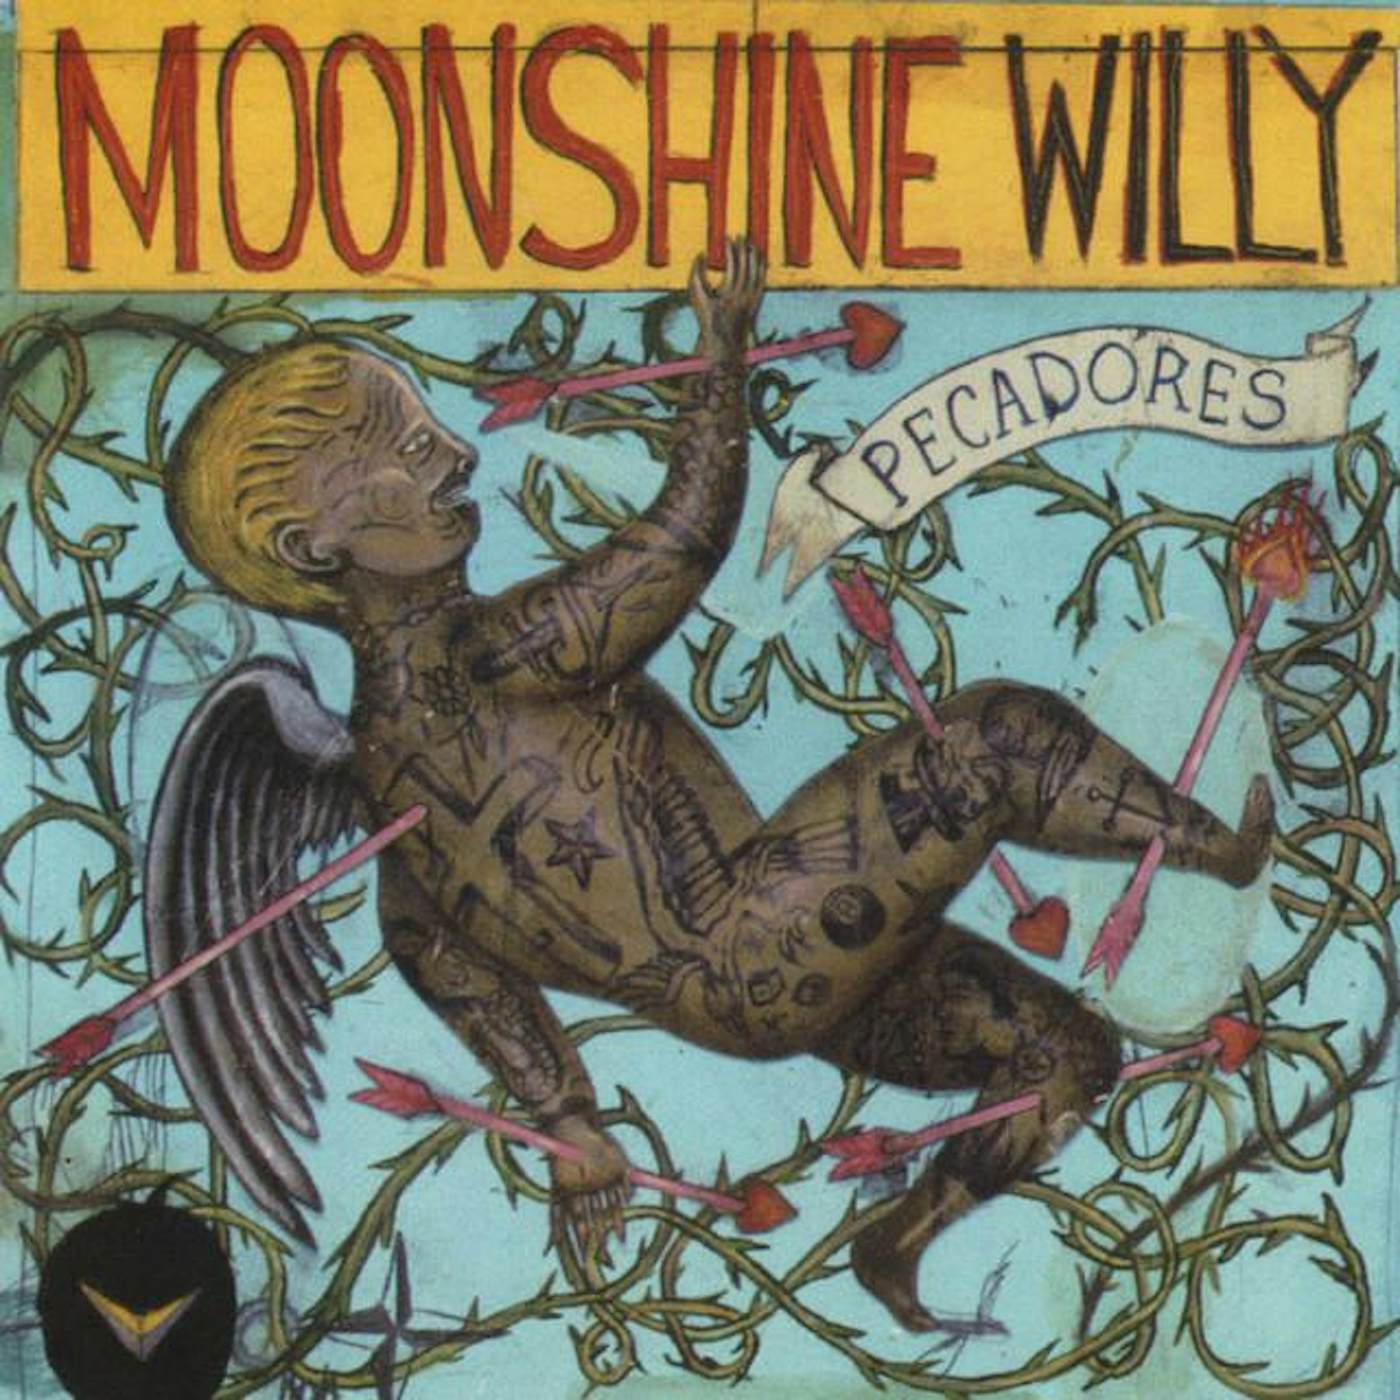 Moonshine Willy